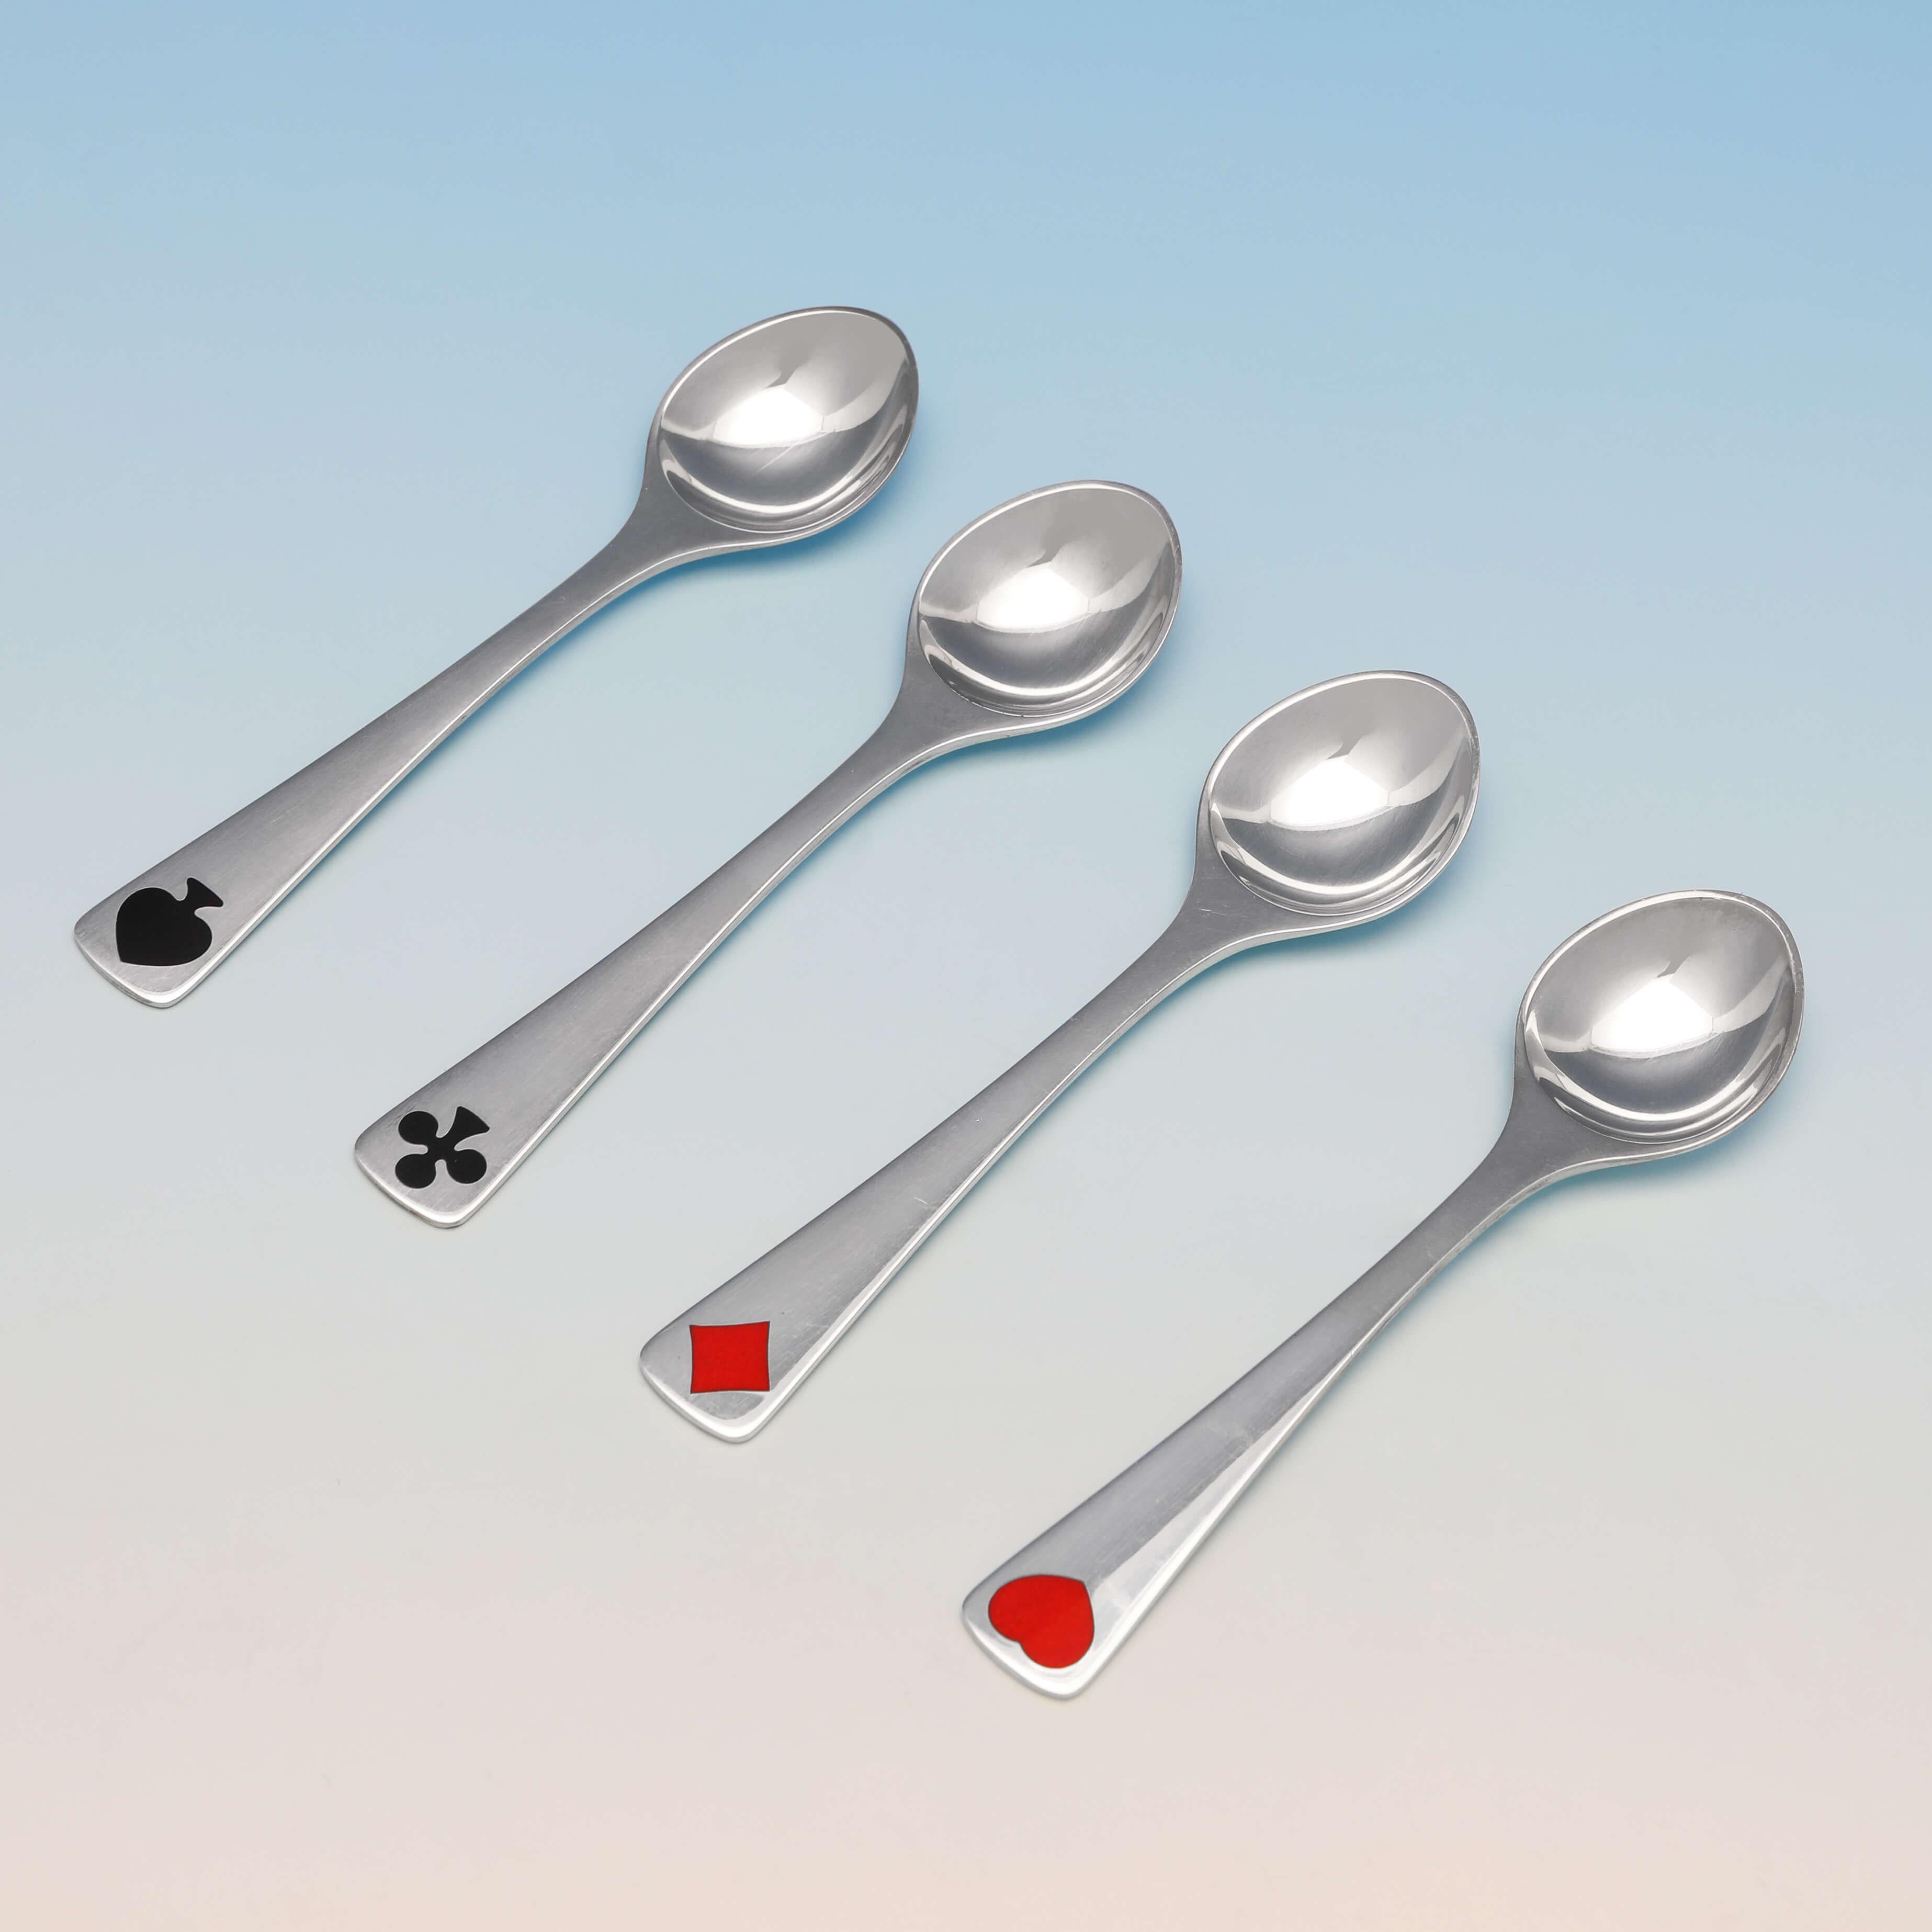 Made by Georg Jensen and carrying the post 1945 mark, this stylish set of sterling silver tea spoons, were designed by Henning Koppel, and are enameled with the 4 card suits, and presented in their original box. Each teaspoon measures 4